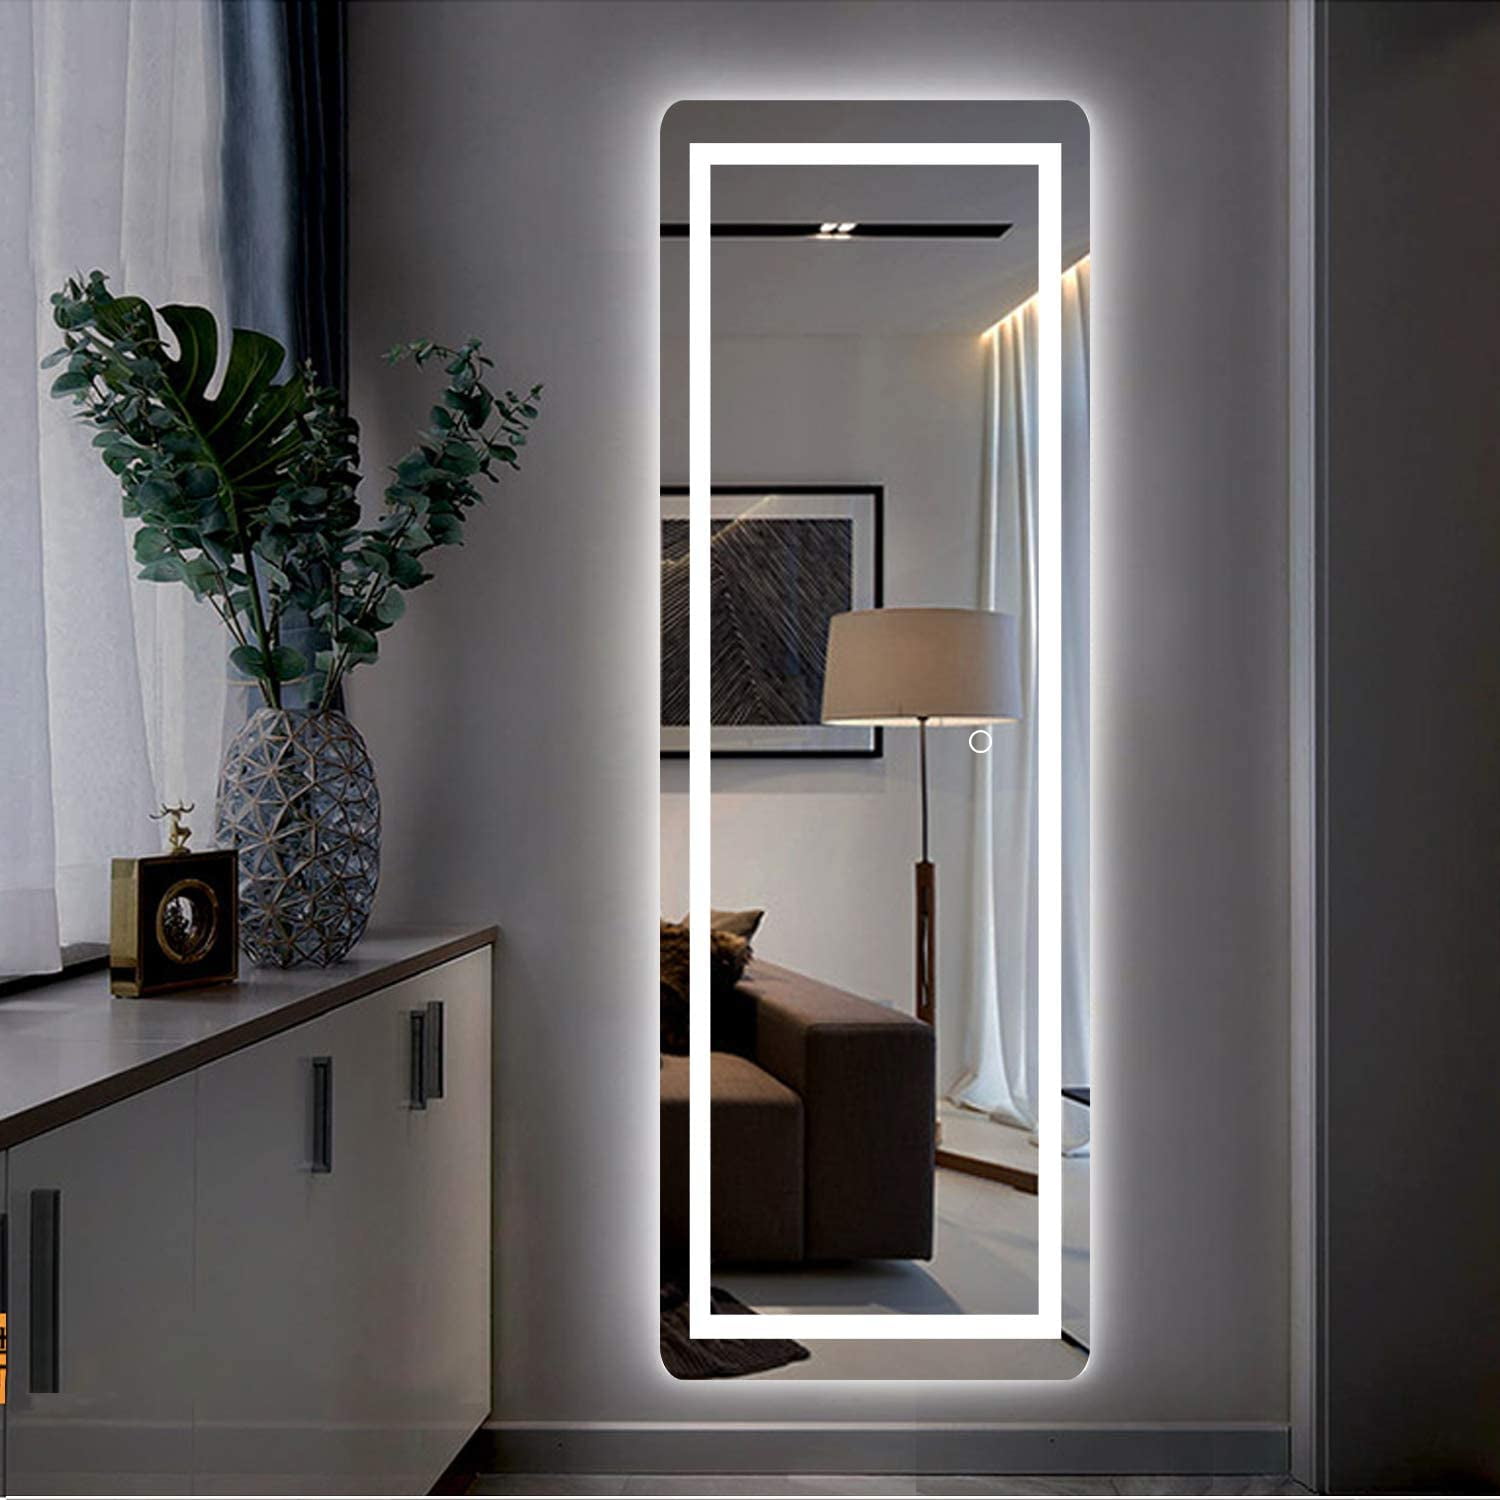 Led Mirror Full Length Wall, How To Mount Full Length Mirror On Wall